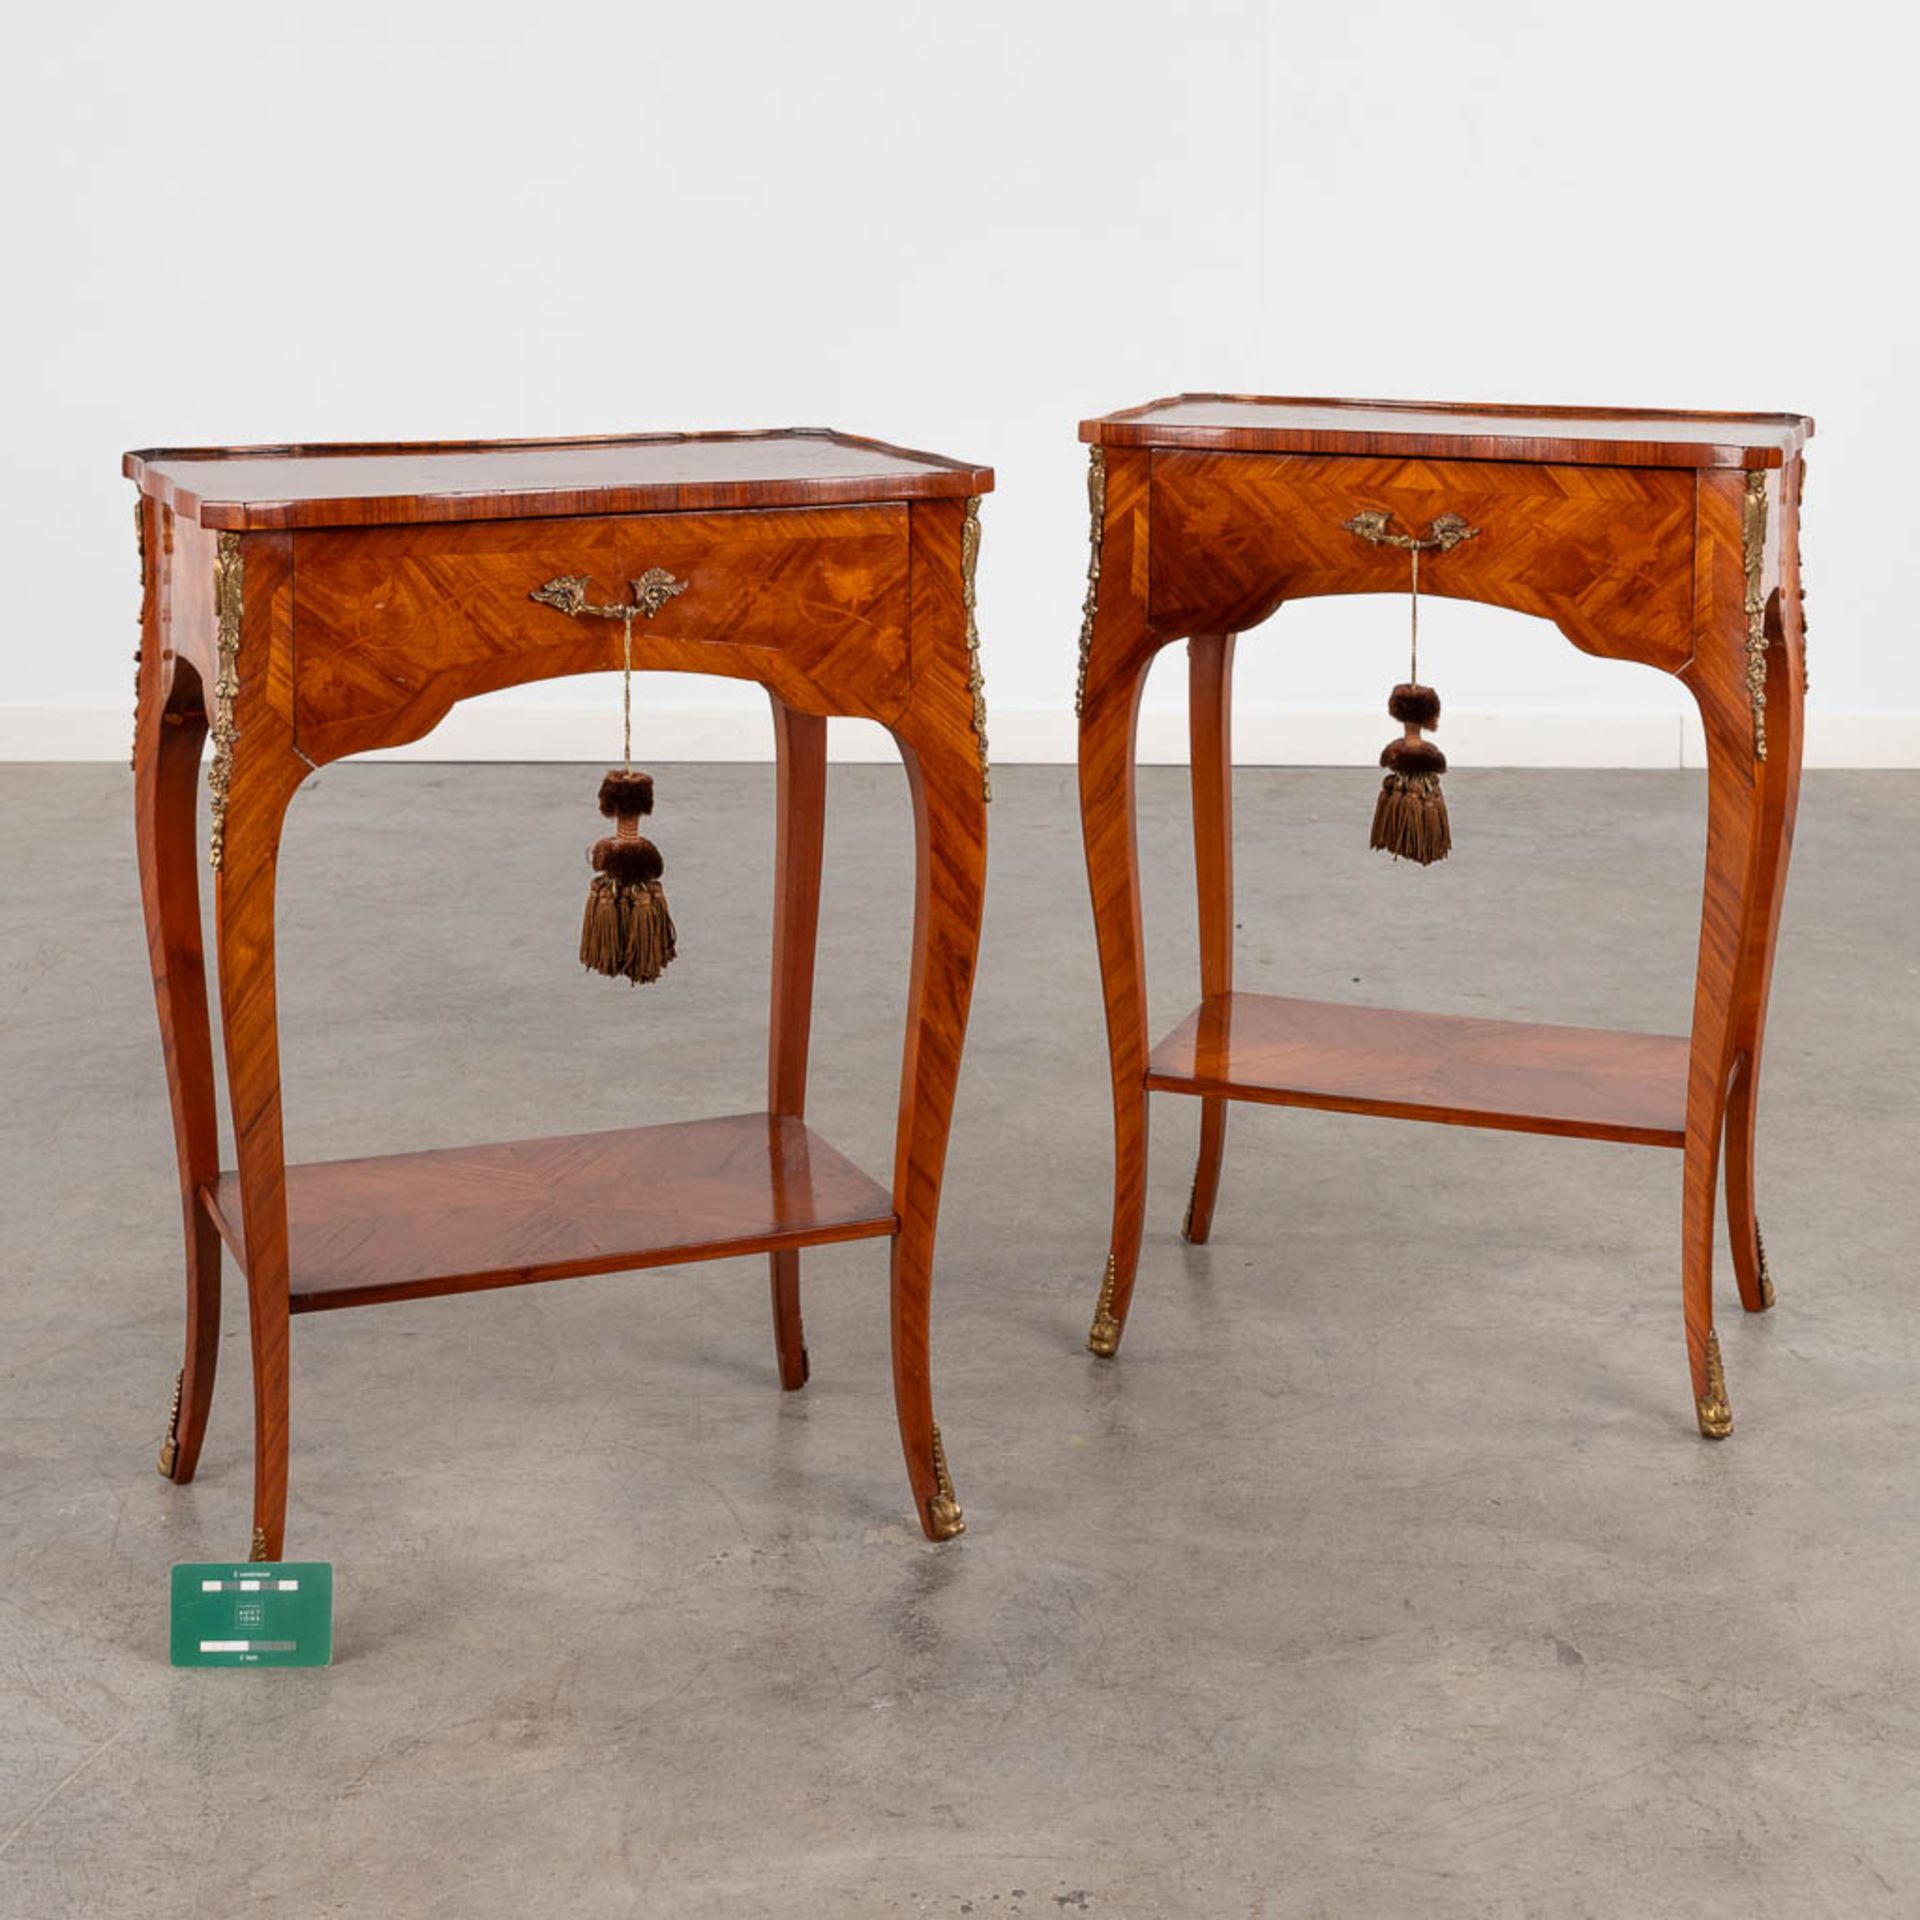 A pair of two-tier side tables with a drawer, wood with marquetry inlay. 20th C. (D:30 x W:45 x H:63 - Image 2 of 14